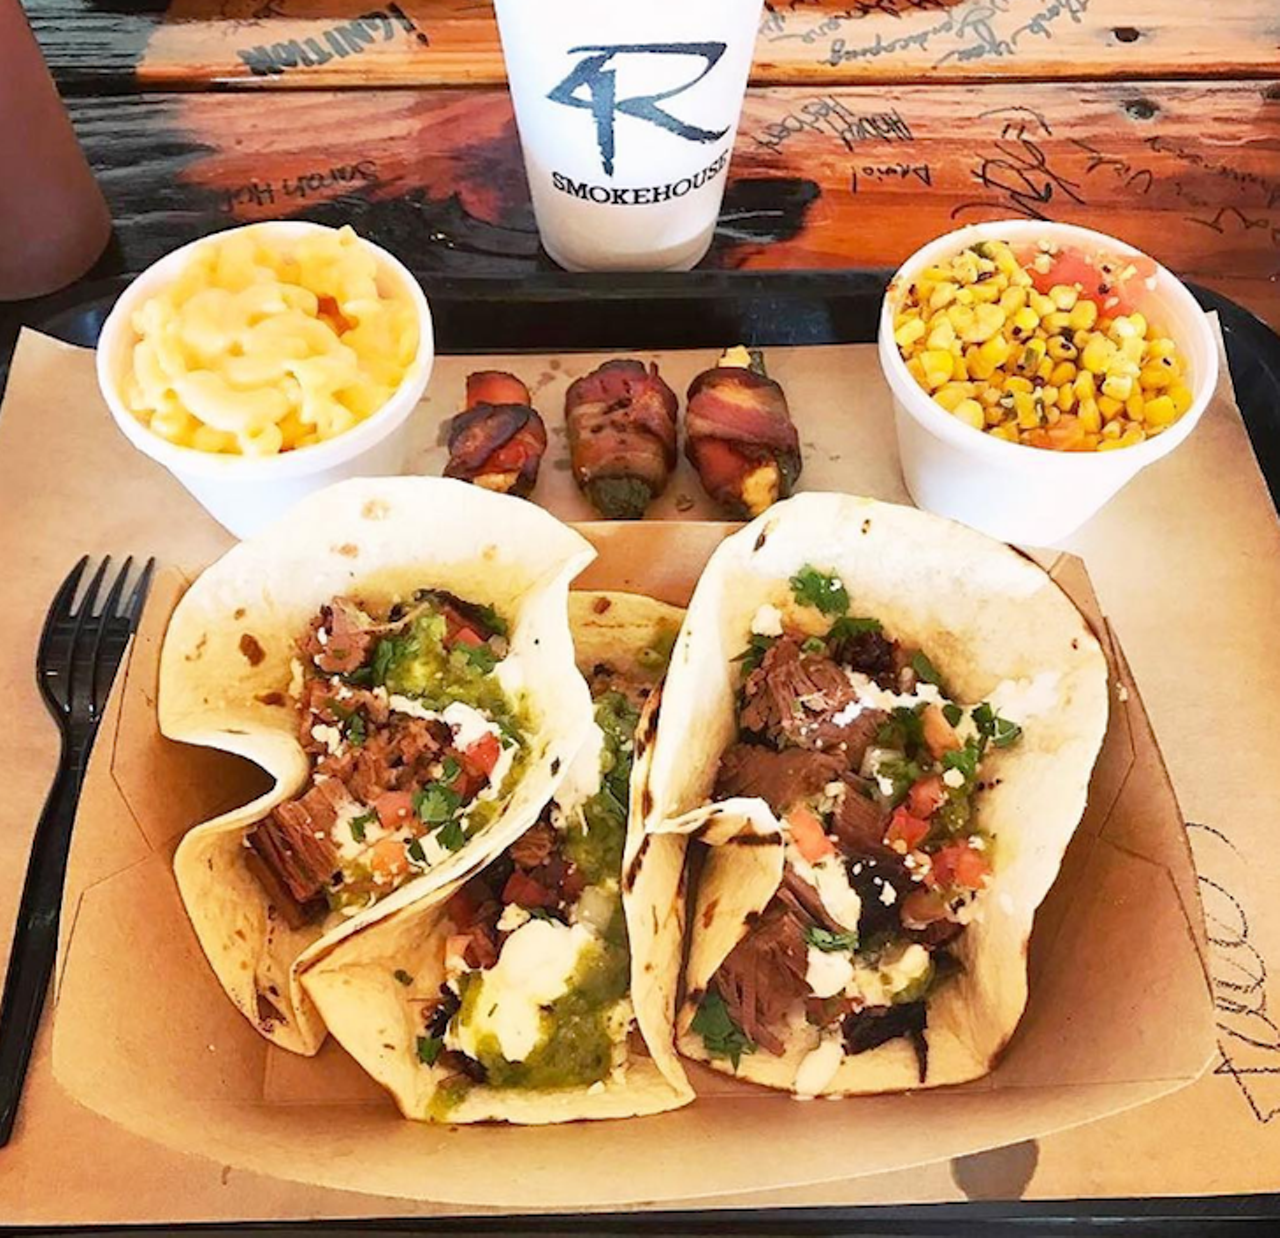  4 Rivers Smokehouse
1600 W Fairbanks Ave, Winter Park, (407) 474-8377
Tacos may not be the first thing that come to mind when you think about 4 Rivers Smokehouse, but the brisket taco is worth trying, especially on Tuesdays, when you can get three tacos and a beverage for $6.99. 
Photo via 4 Rivers Smokehouse/Instagram